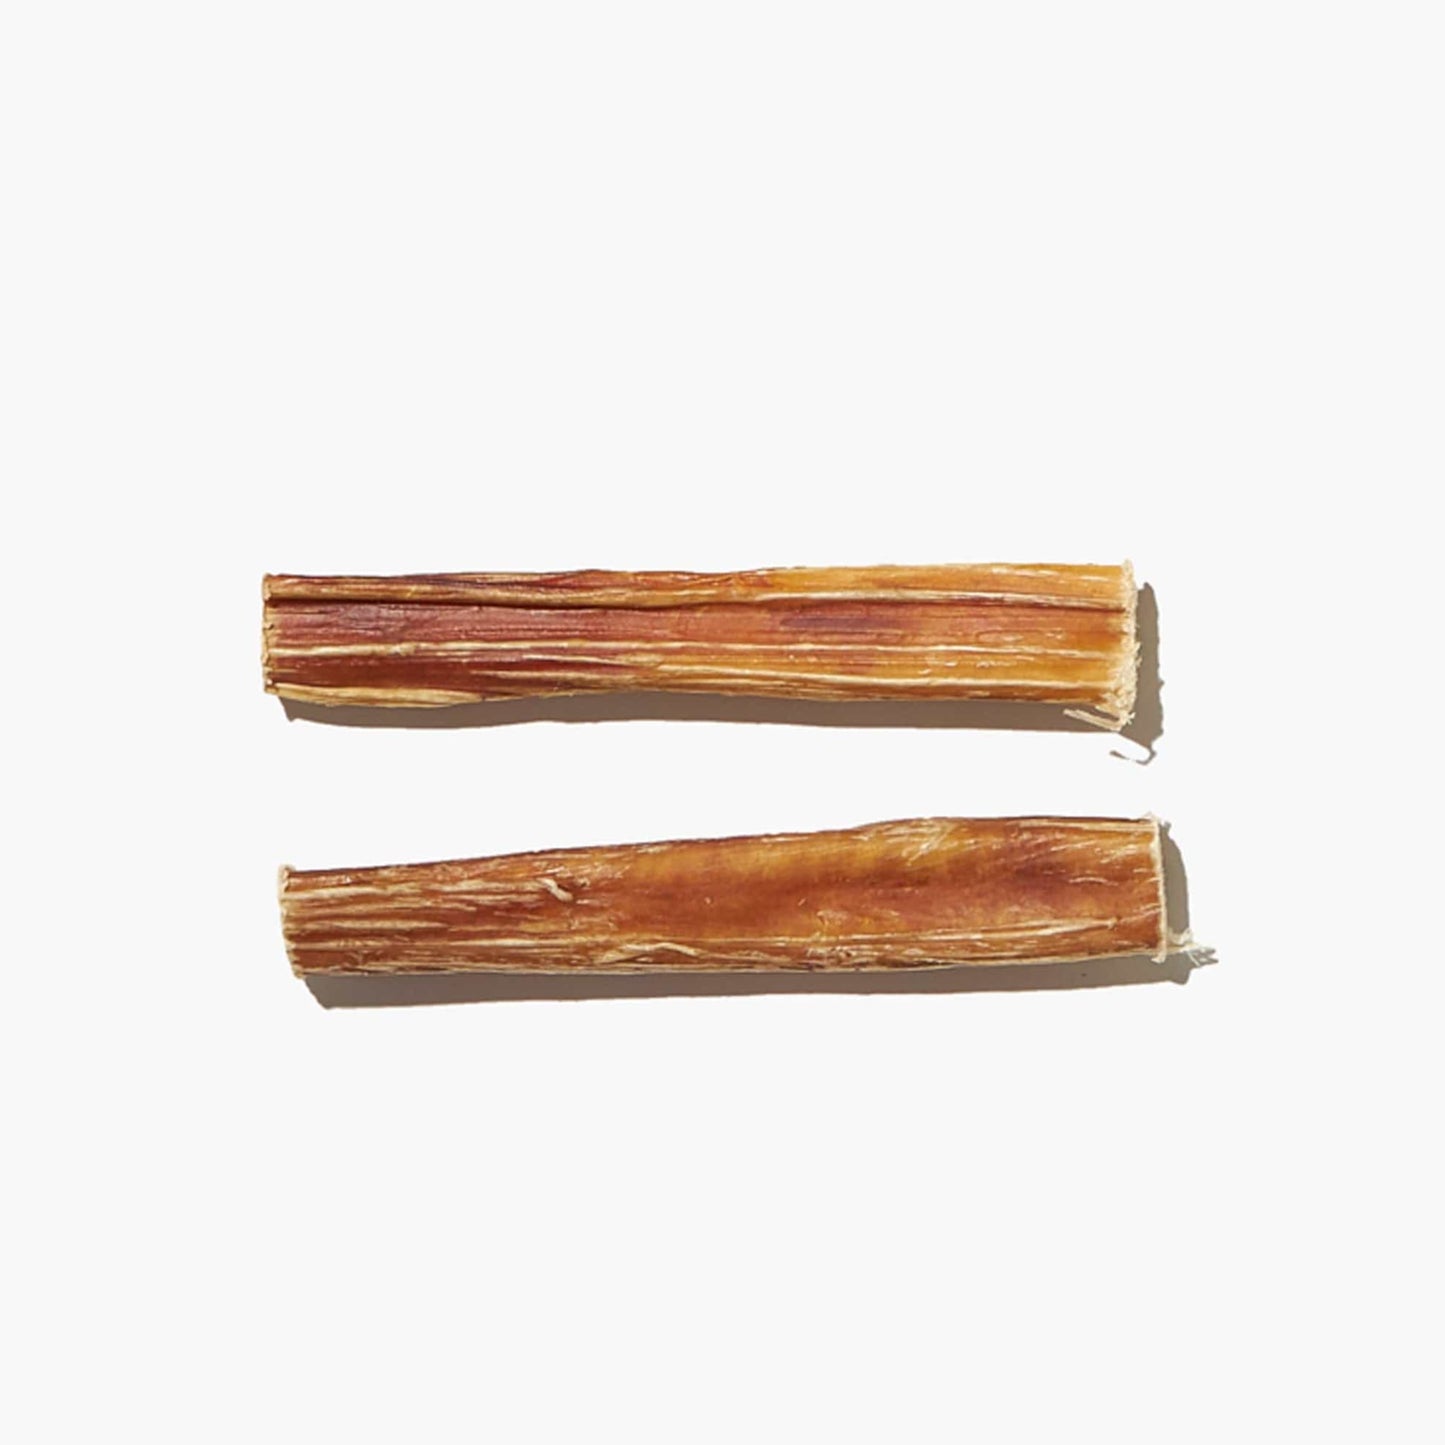 25cm Beef Pizzle (Bully Stick) - Long-Lasting, All-Natural Dog Chew for Dental & Mental Health